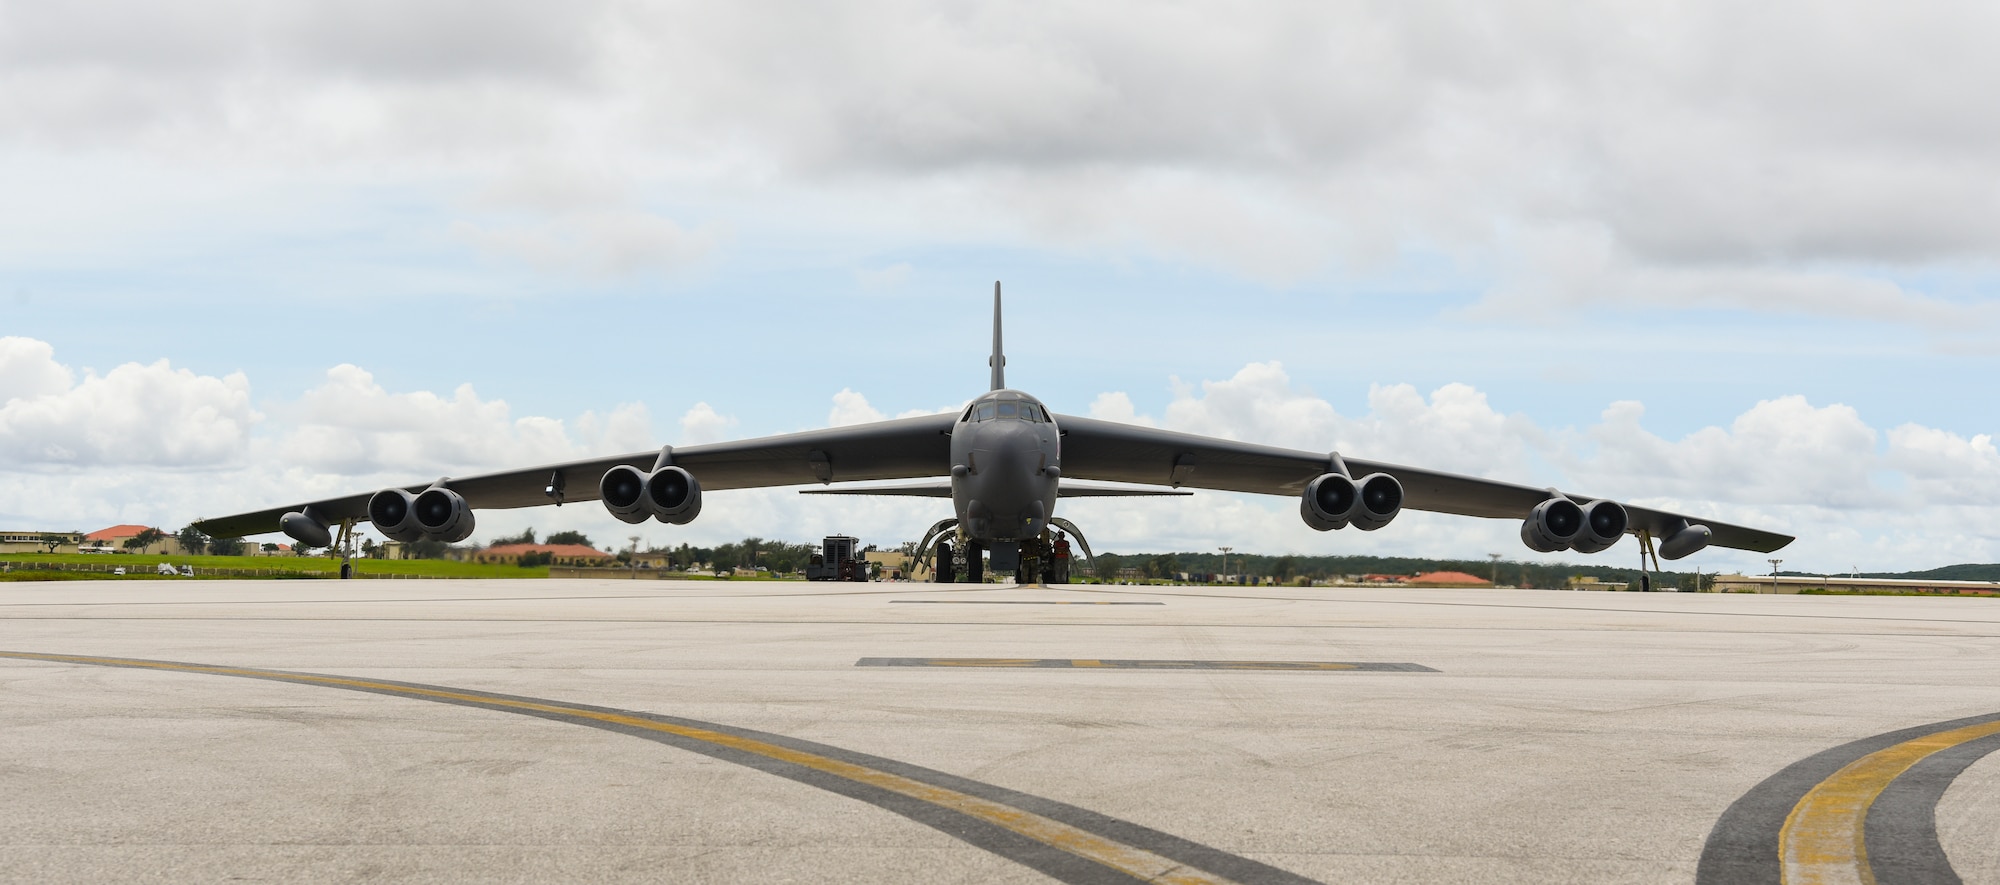 A 69th Expeditionary Bomb Squadron B-52 Stratofortress prepares to taxi down the flightline on Andersen Air Force Base, Guam, Oct. 22, 2019. B-52s, along with B-2 Spirits and B-1B Lancers are flown to maintain the Continuous Bomber Presence Mission housed on Andersen. The B-52 is a long-range, heavy bomber capable of flying at subsonic speeds at altitudes up to 50,000 feet with an un-refueled combat range of 8,800 miles. (U.S. Air Force photo by Airman 1st Class Michael S. Murphy)